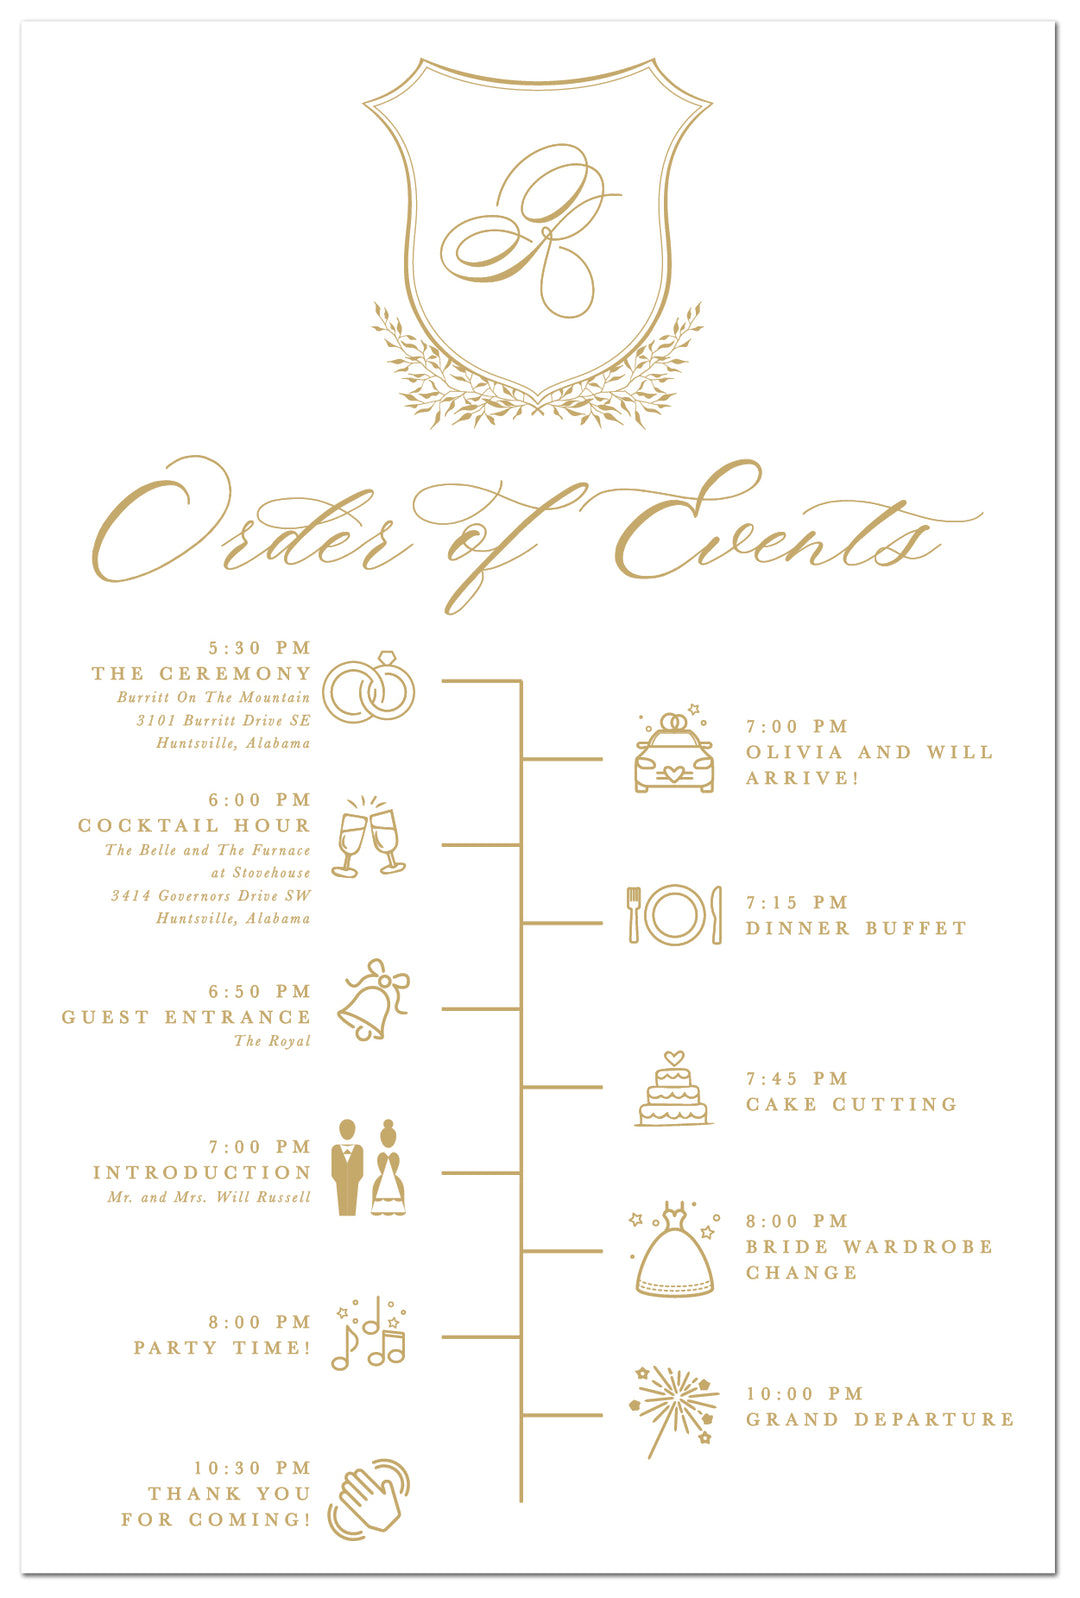 Order Of Events Wedding Sign